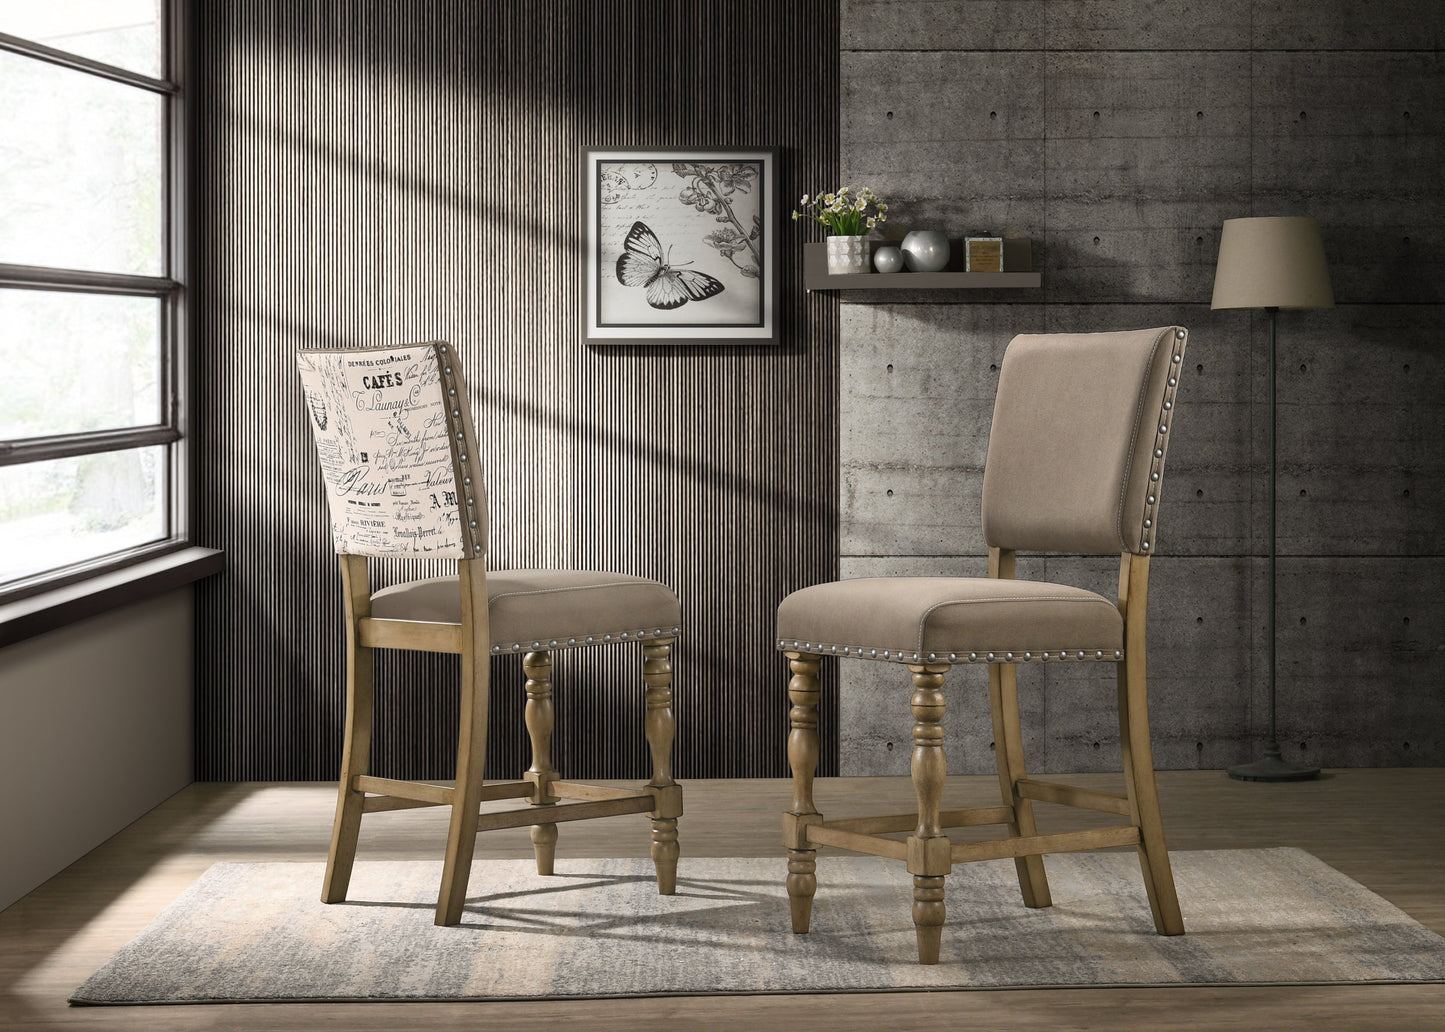 Birmingham 5-piece Driftwood Finish Table with Nail Head Chairs Counter Height Dining Set